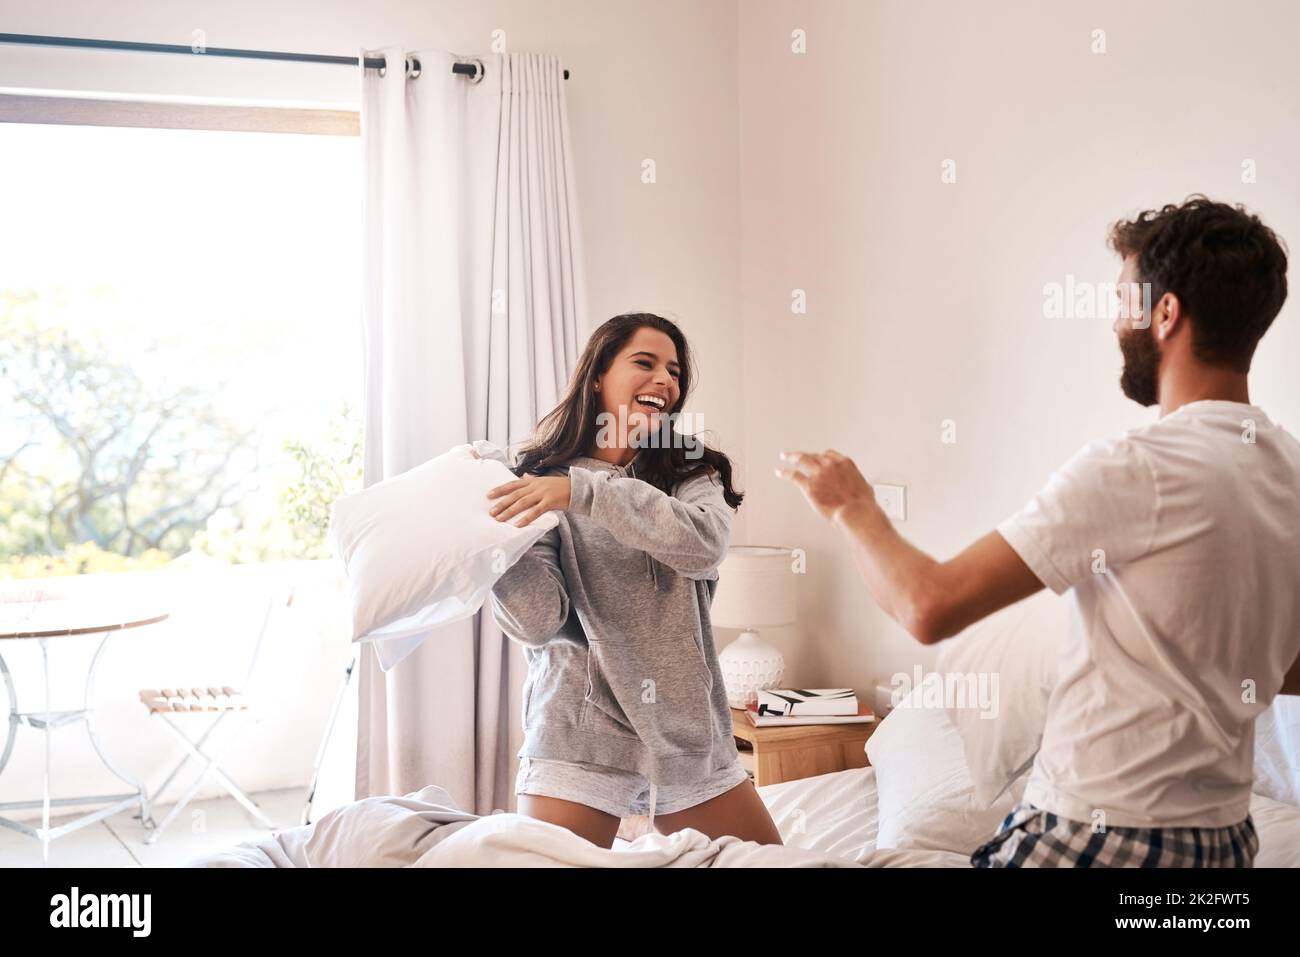 Start every morning with silliness. Shot of a happy young couple having a pillow fight in bed. Stock Photo